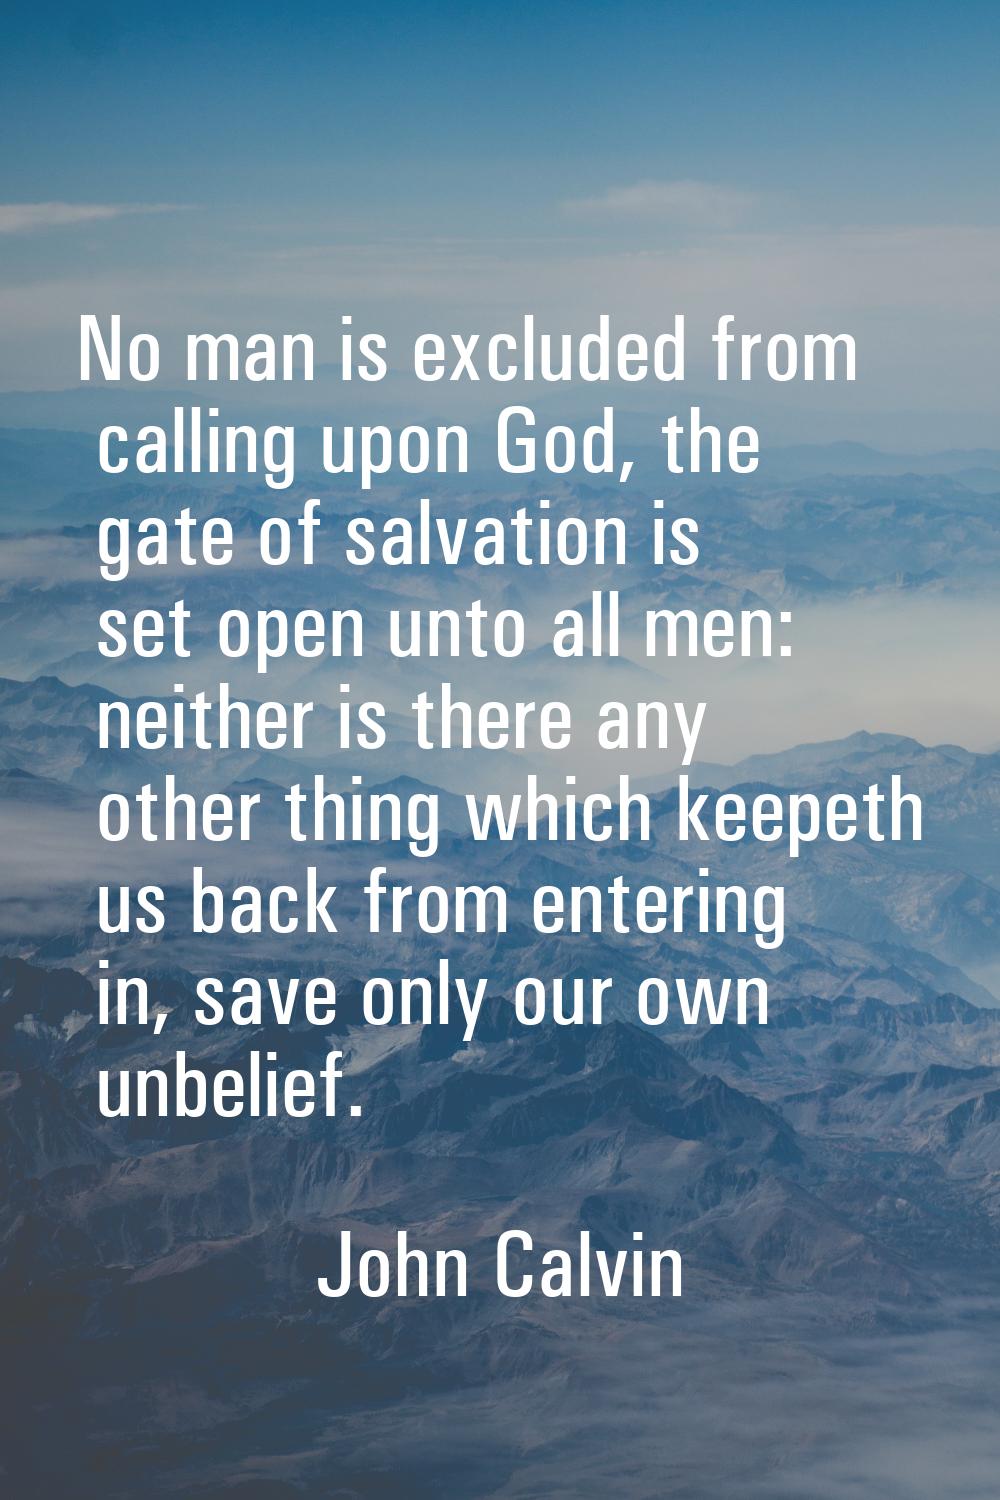 No man is excluded from calling upon God, the gate of salvation is set open unto all men: neither i